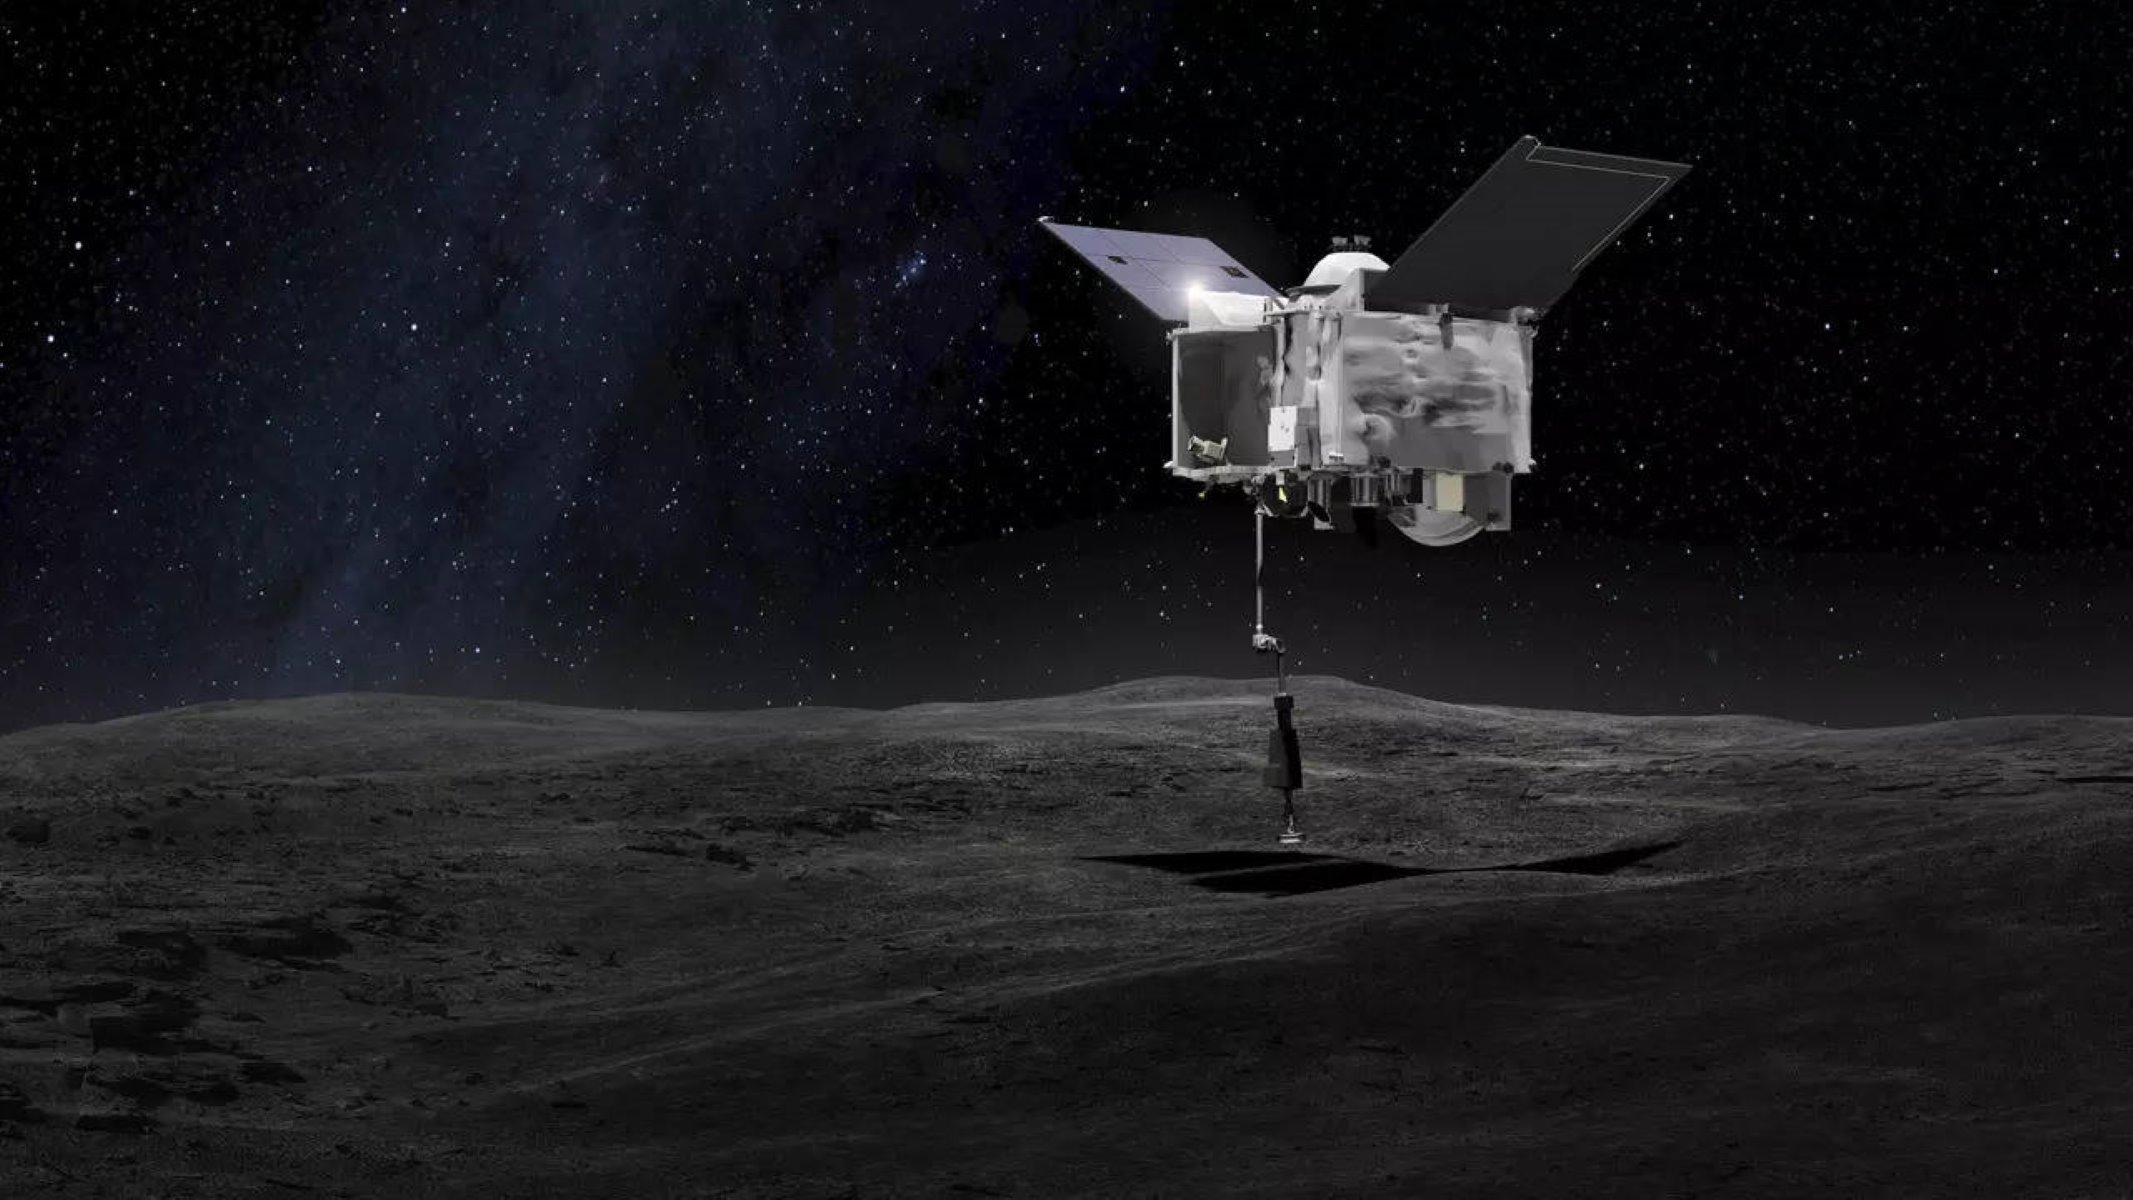 NASA Capsule Returns With Asteroid Sample, Signaling A Step Forward In Space Exploration